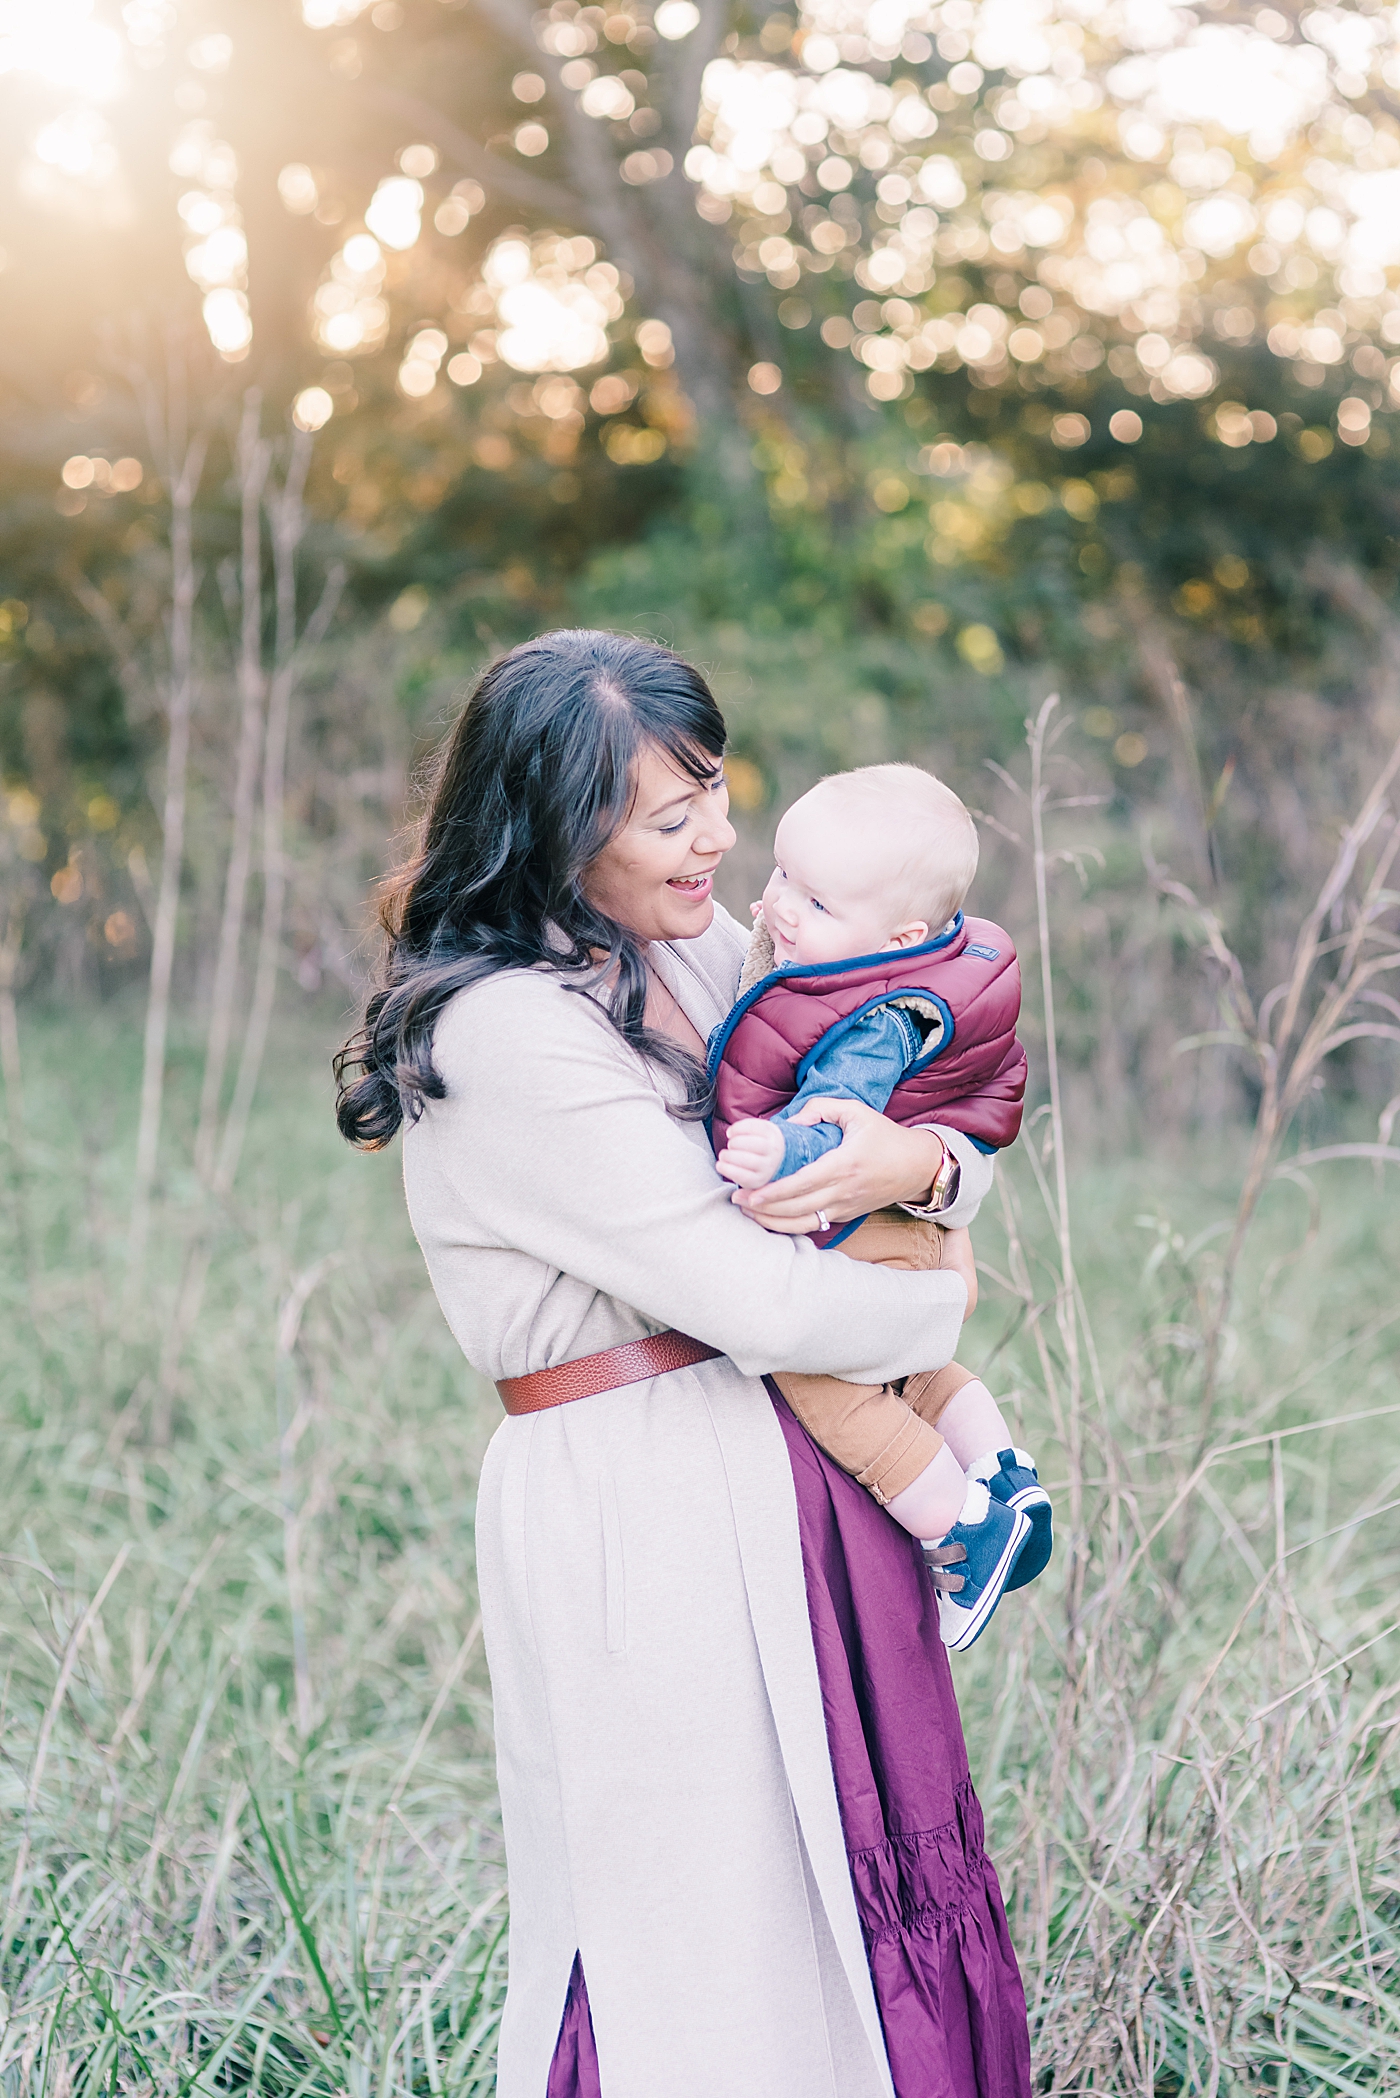 Mom in purple snuggling with baby boy | Photo by Anna Wisjo Photography